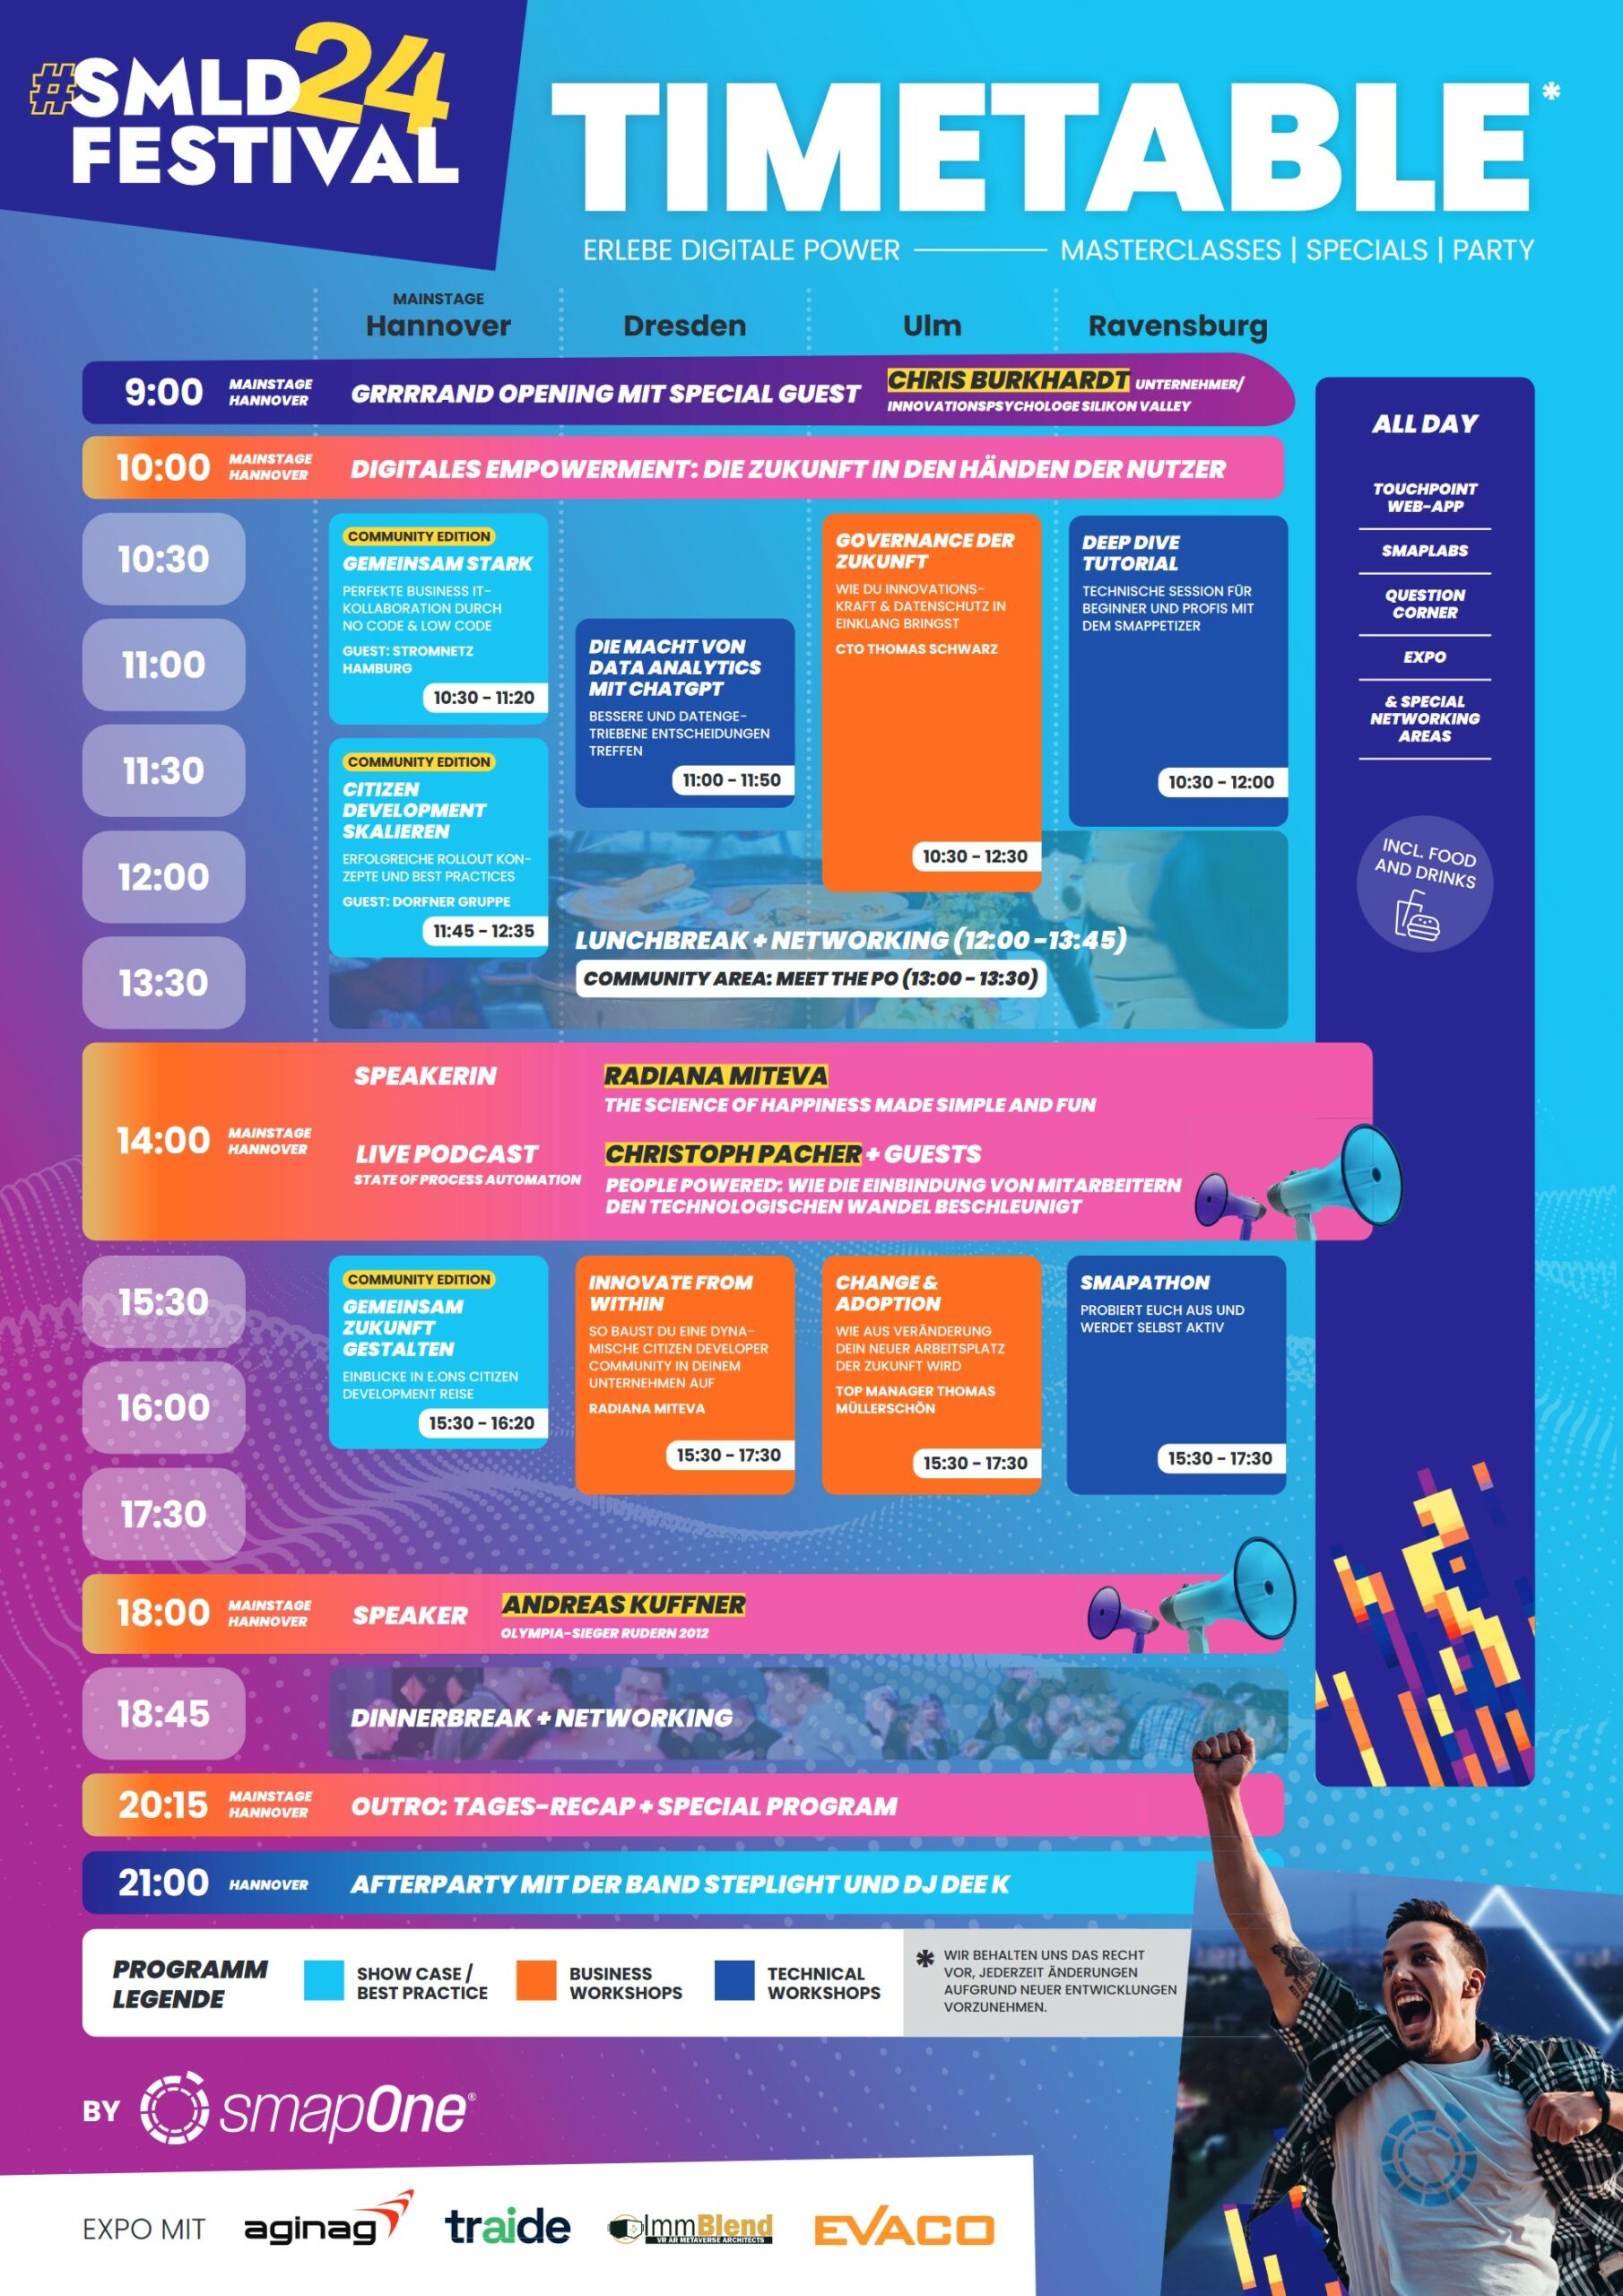 SMLD24 Timetable Poster